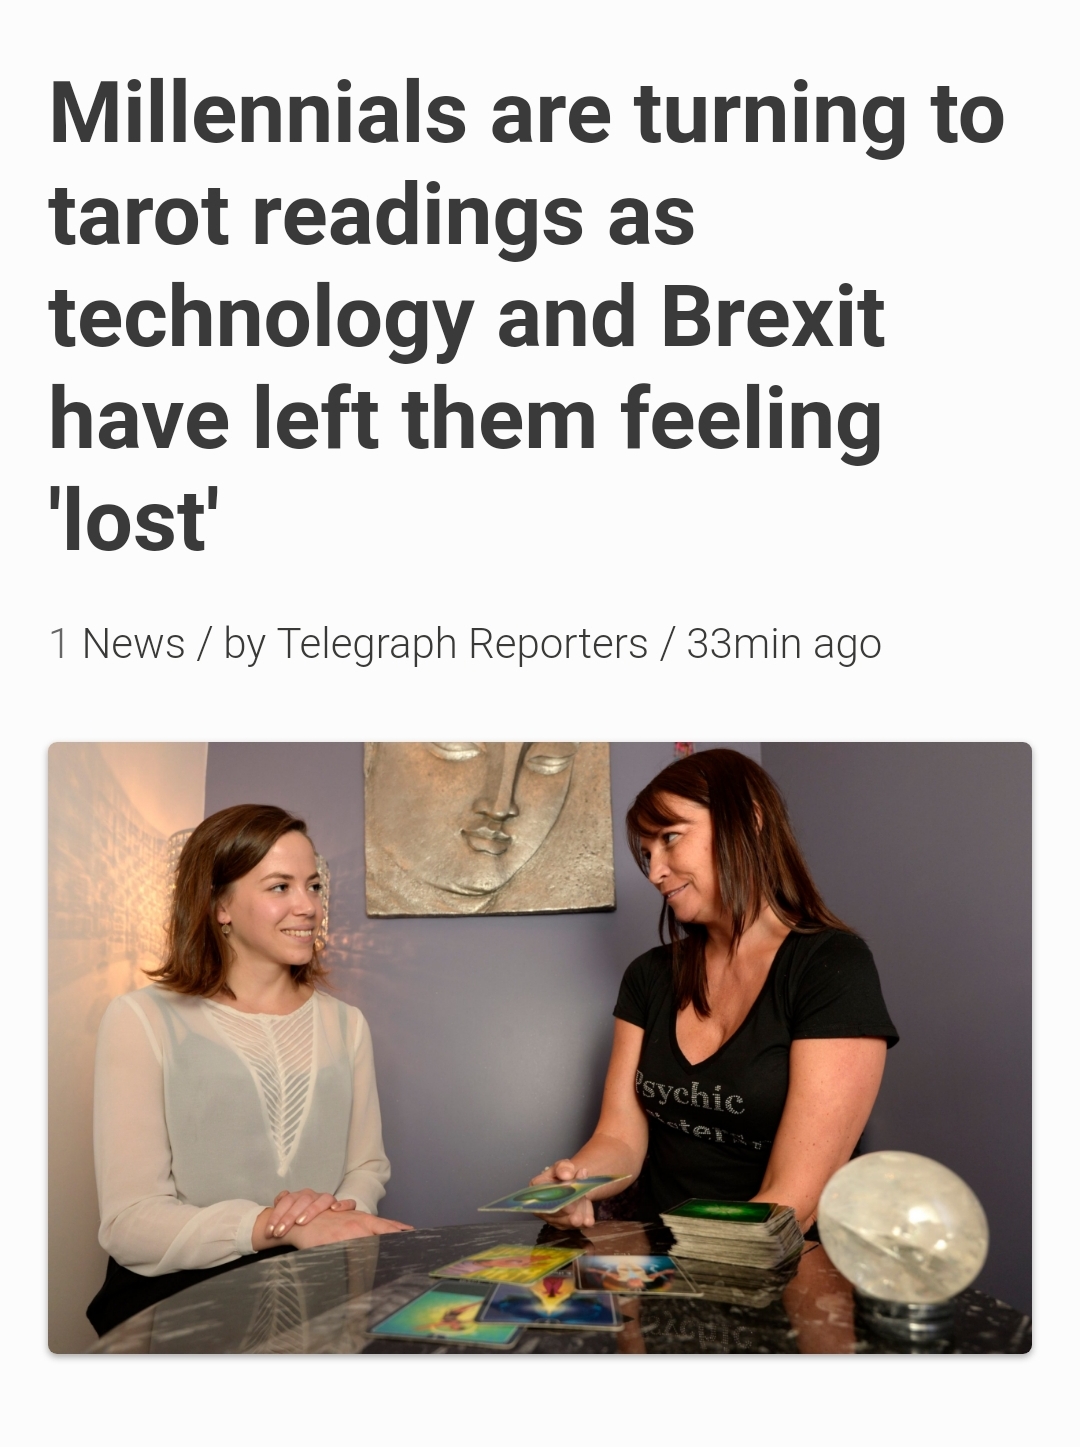 human behavior - Millennials are turning to tarot readings as technology and Brexit have left them feeling 'lost' 1 News by Telegraph Reporters 33min ago syehin